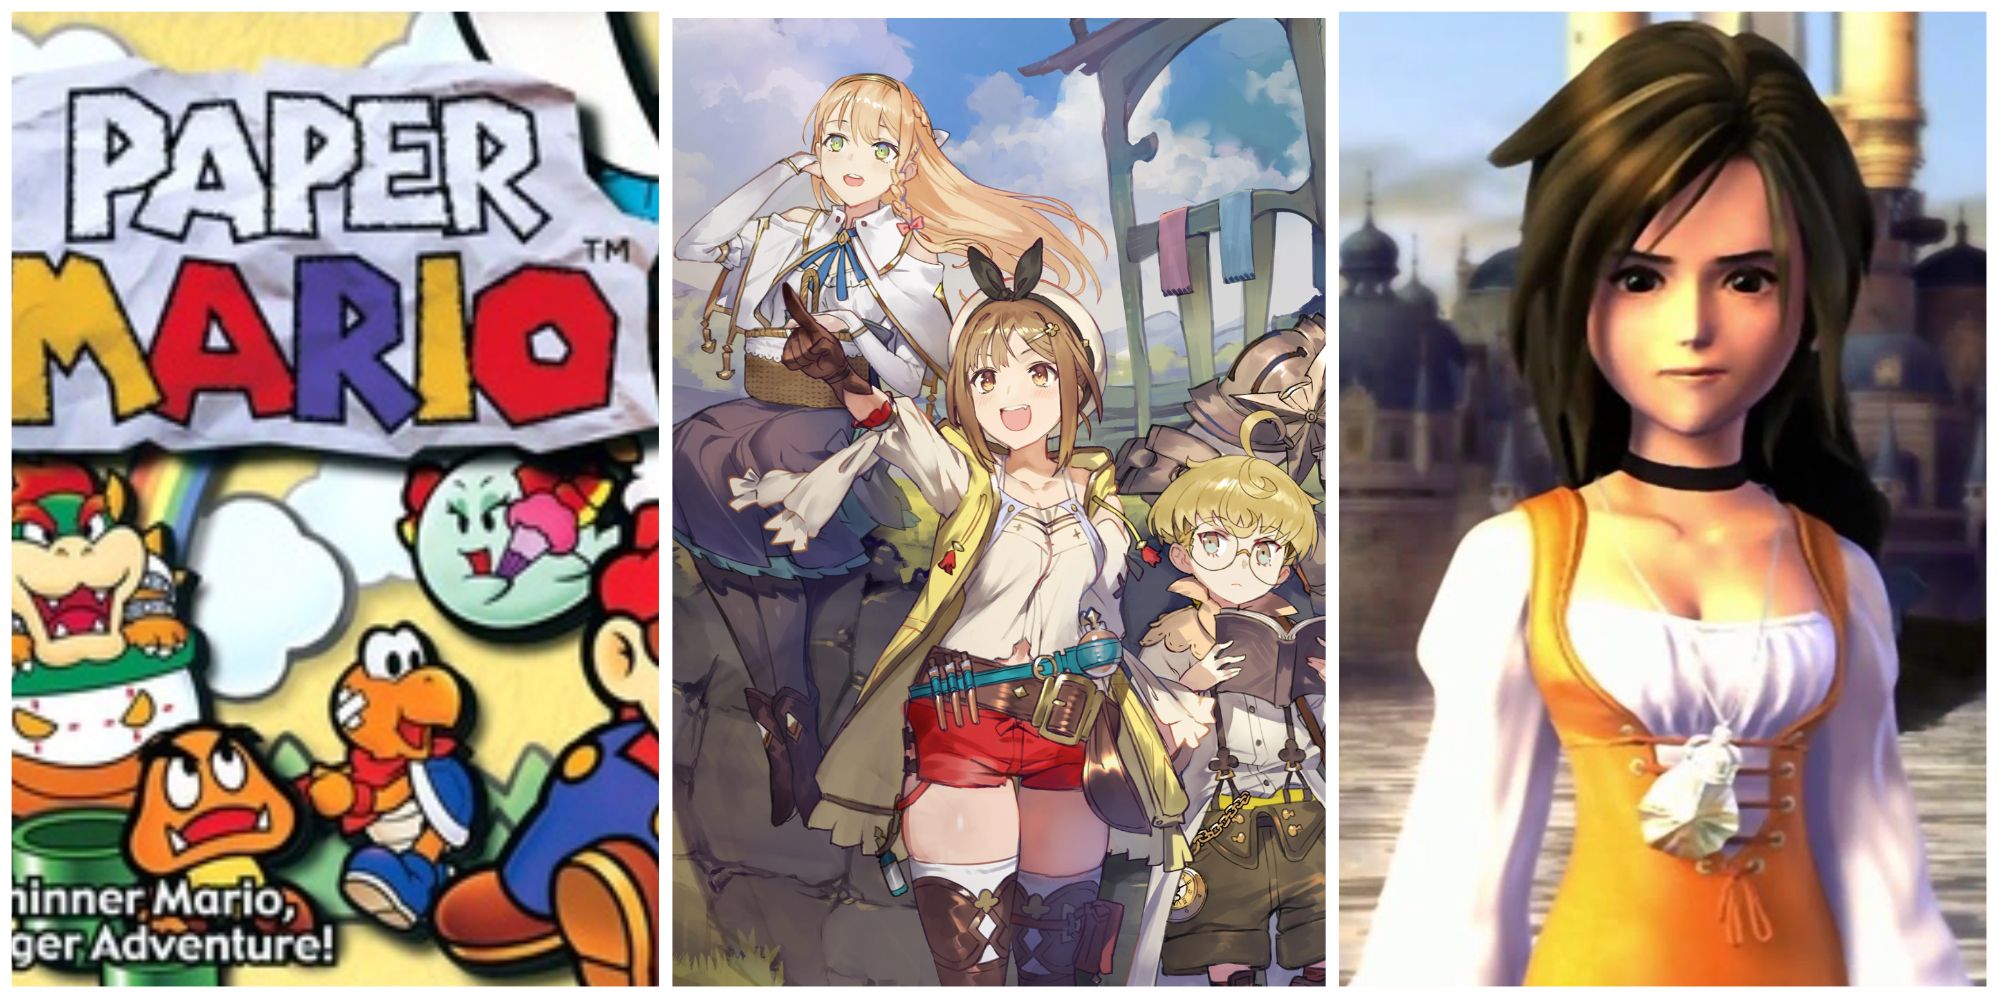 A split image featuring Paper Mario, Atelier Ryza, and Final Fantasy IX